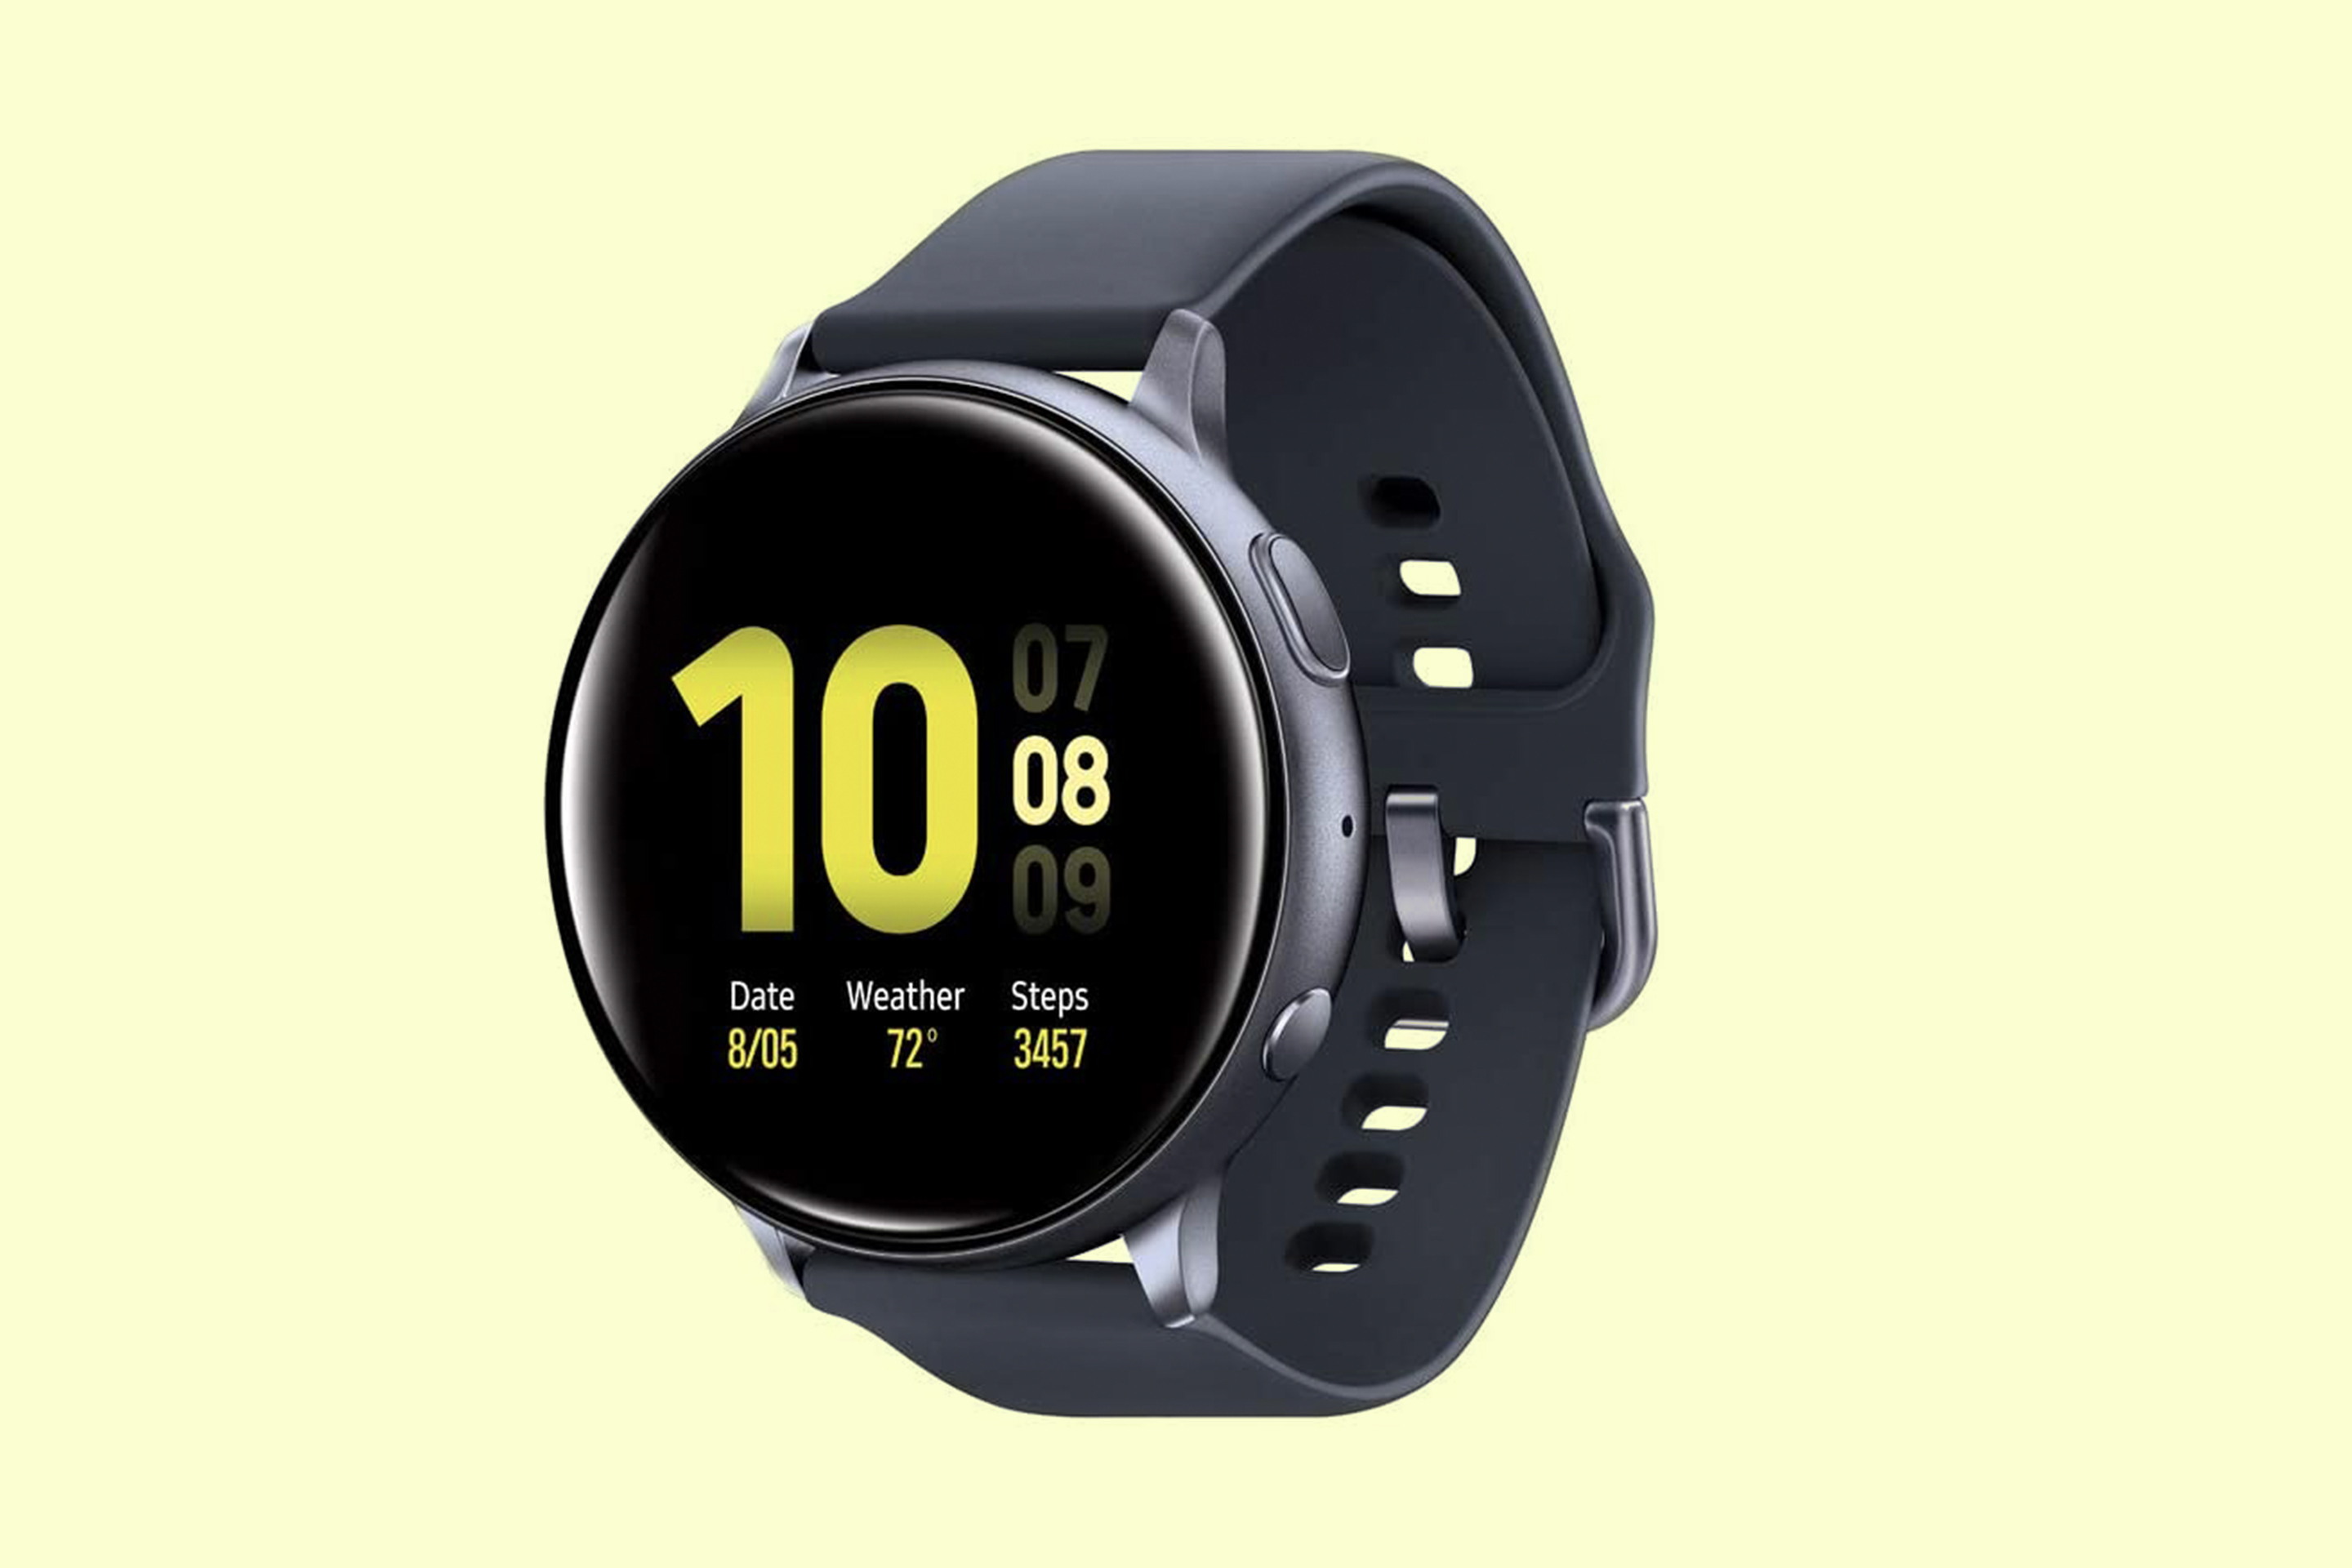 Best Prime Day Deals on Fitness Trackers and Smartwatches